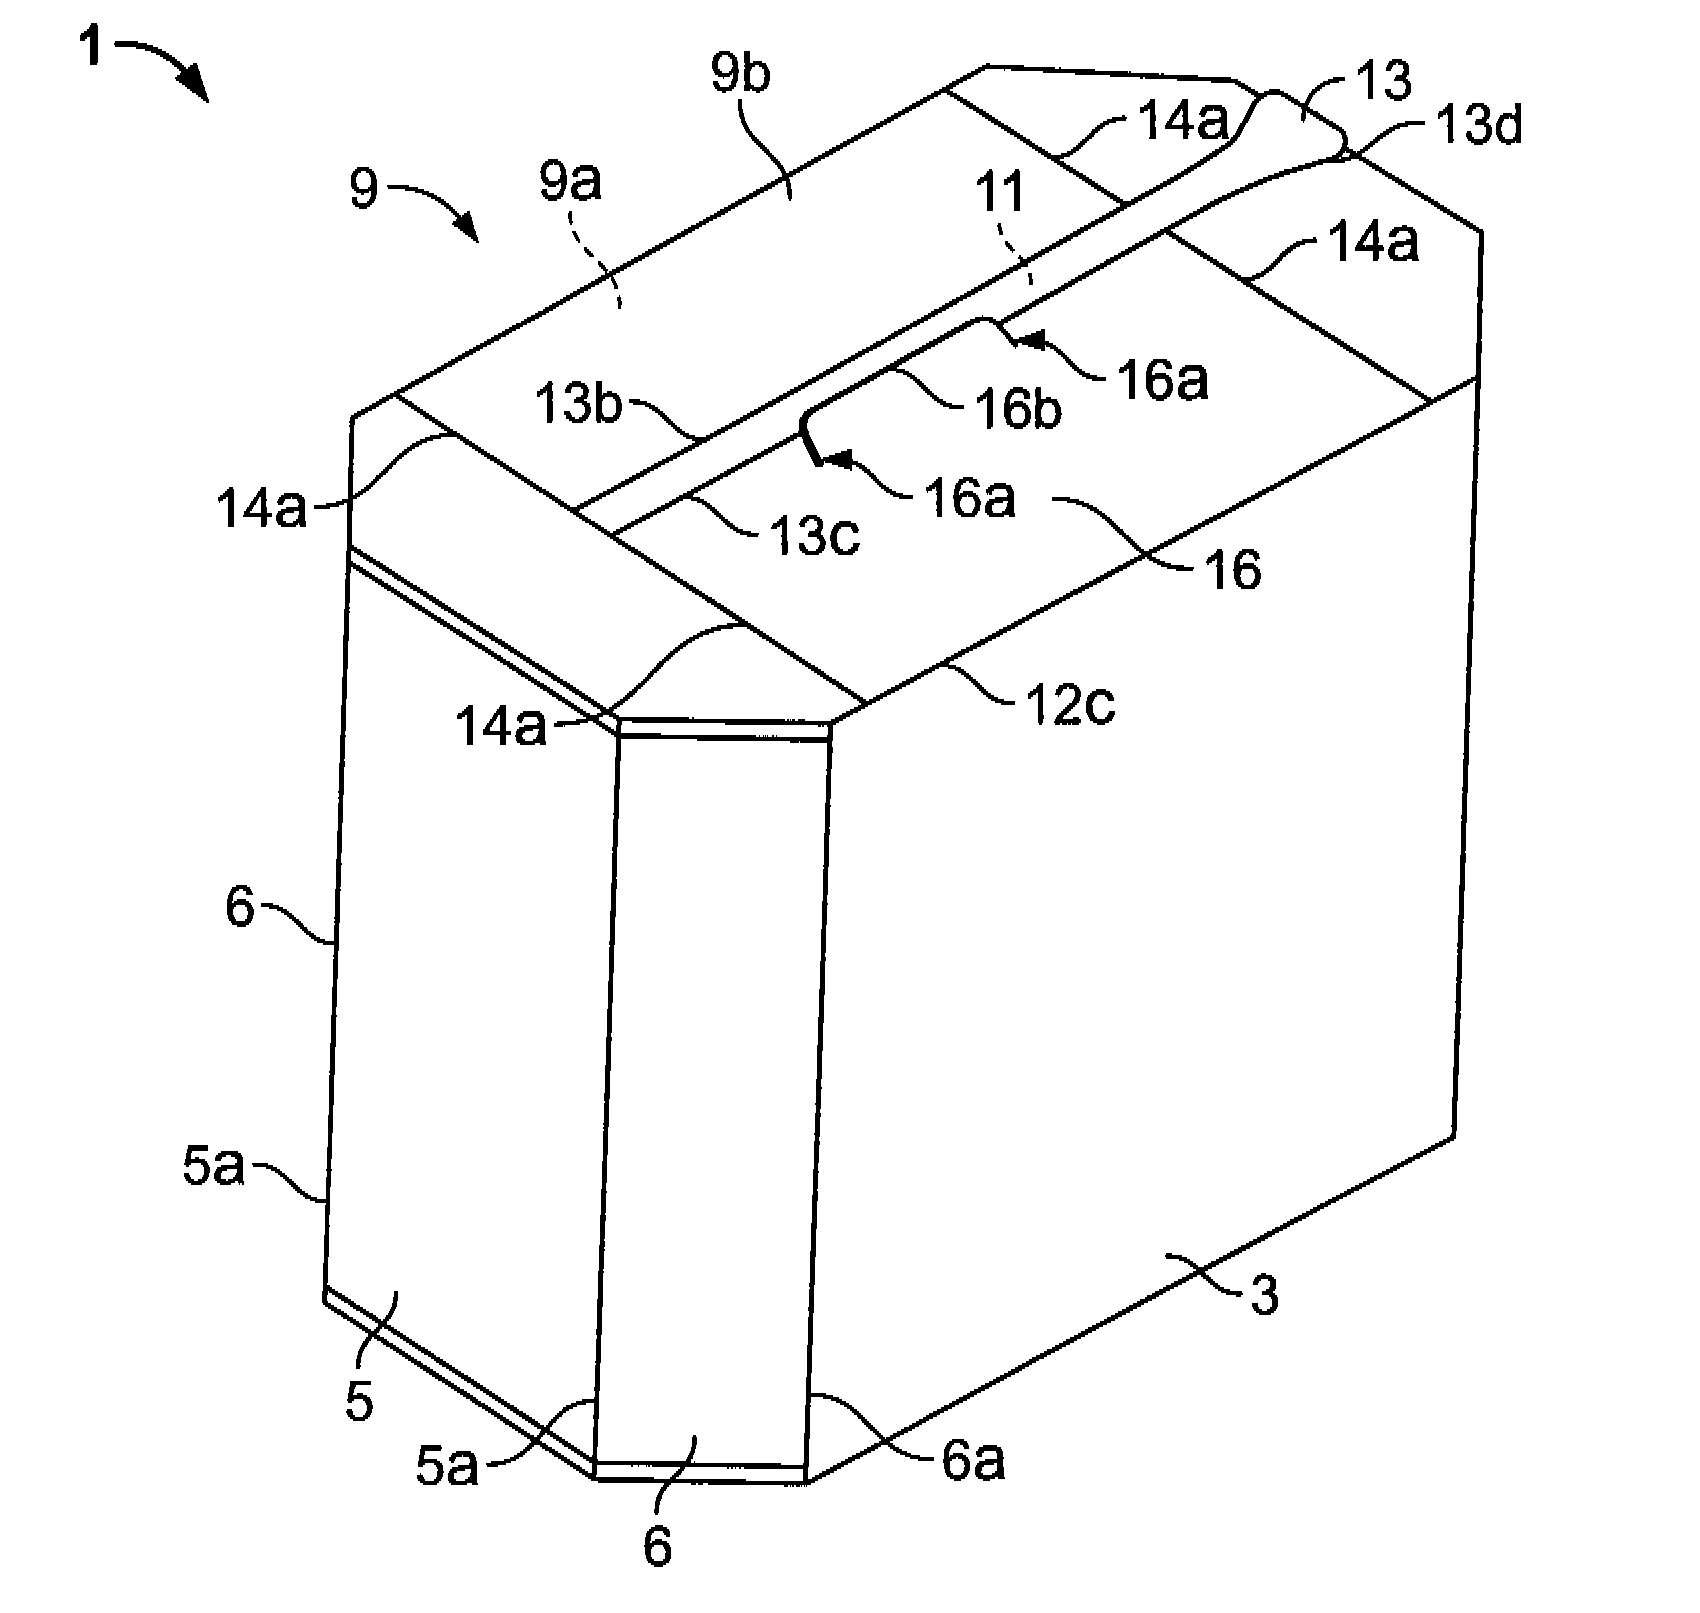 Anti-sifting polygonal carton and methods of assembly